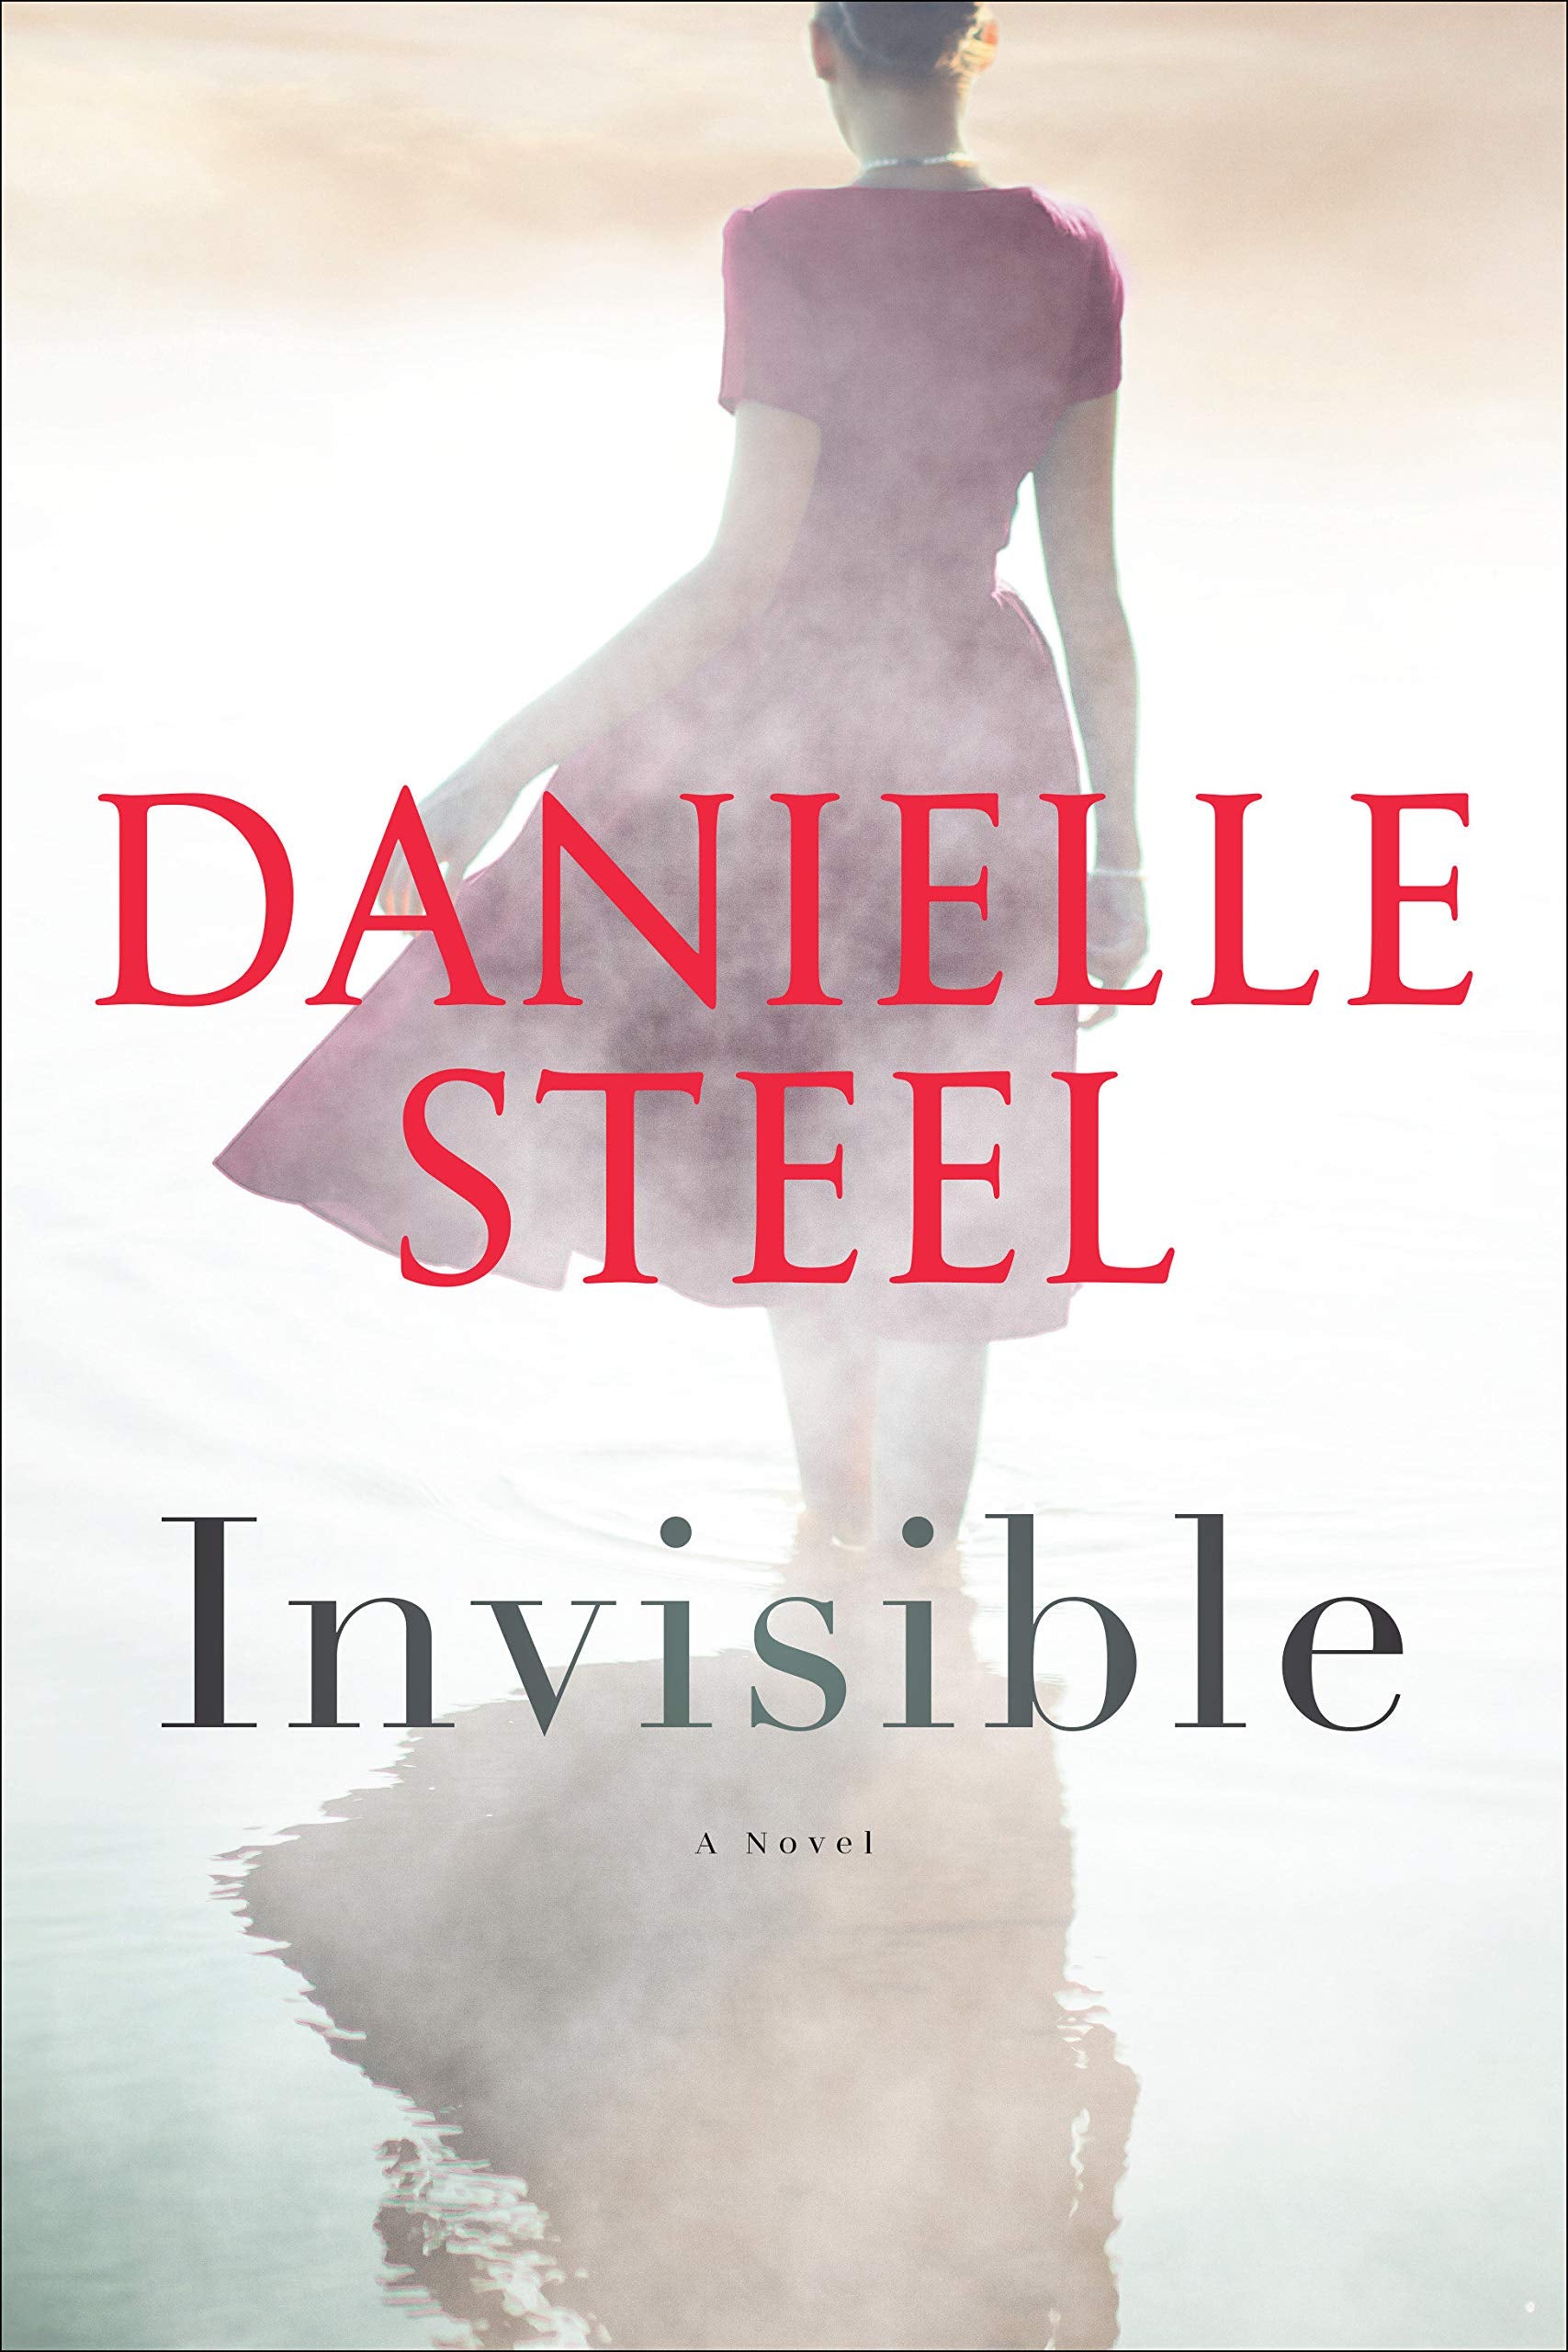 Invisible: A Novel Hardcover by Danielle Steel